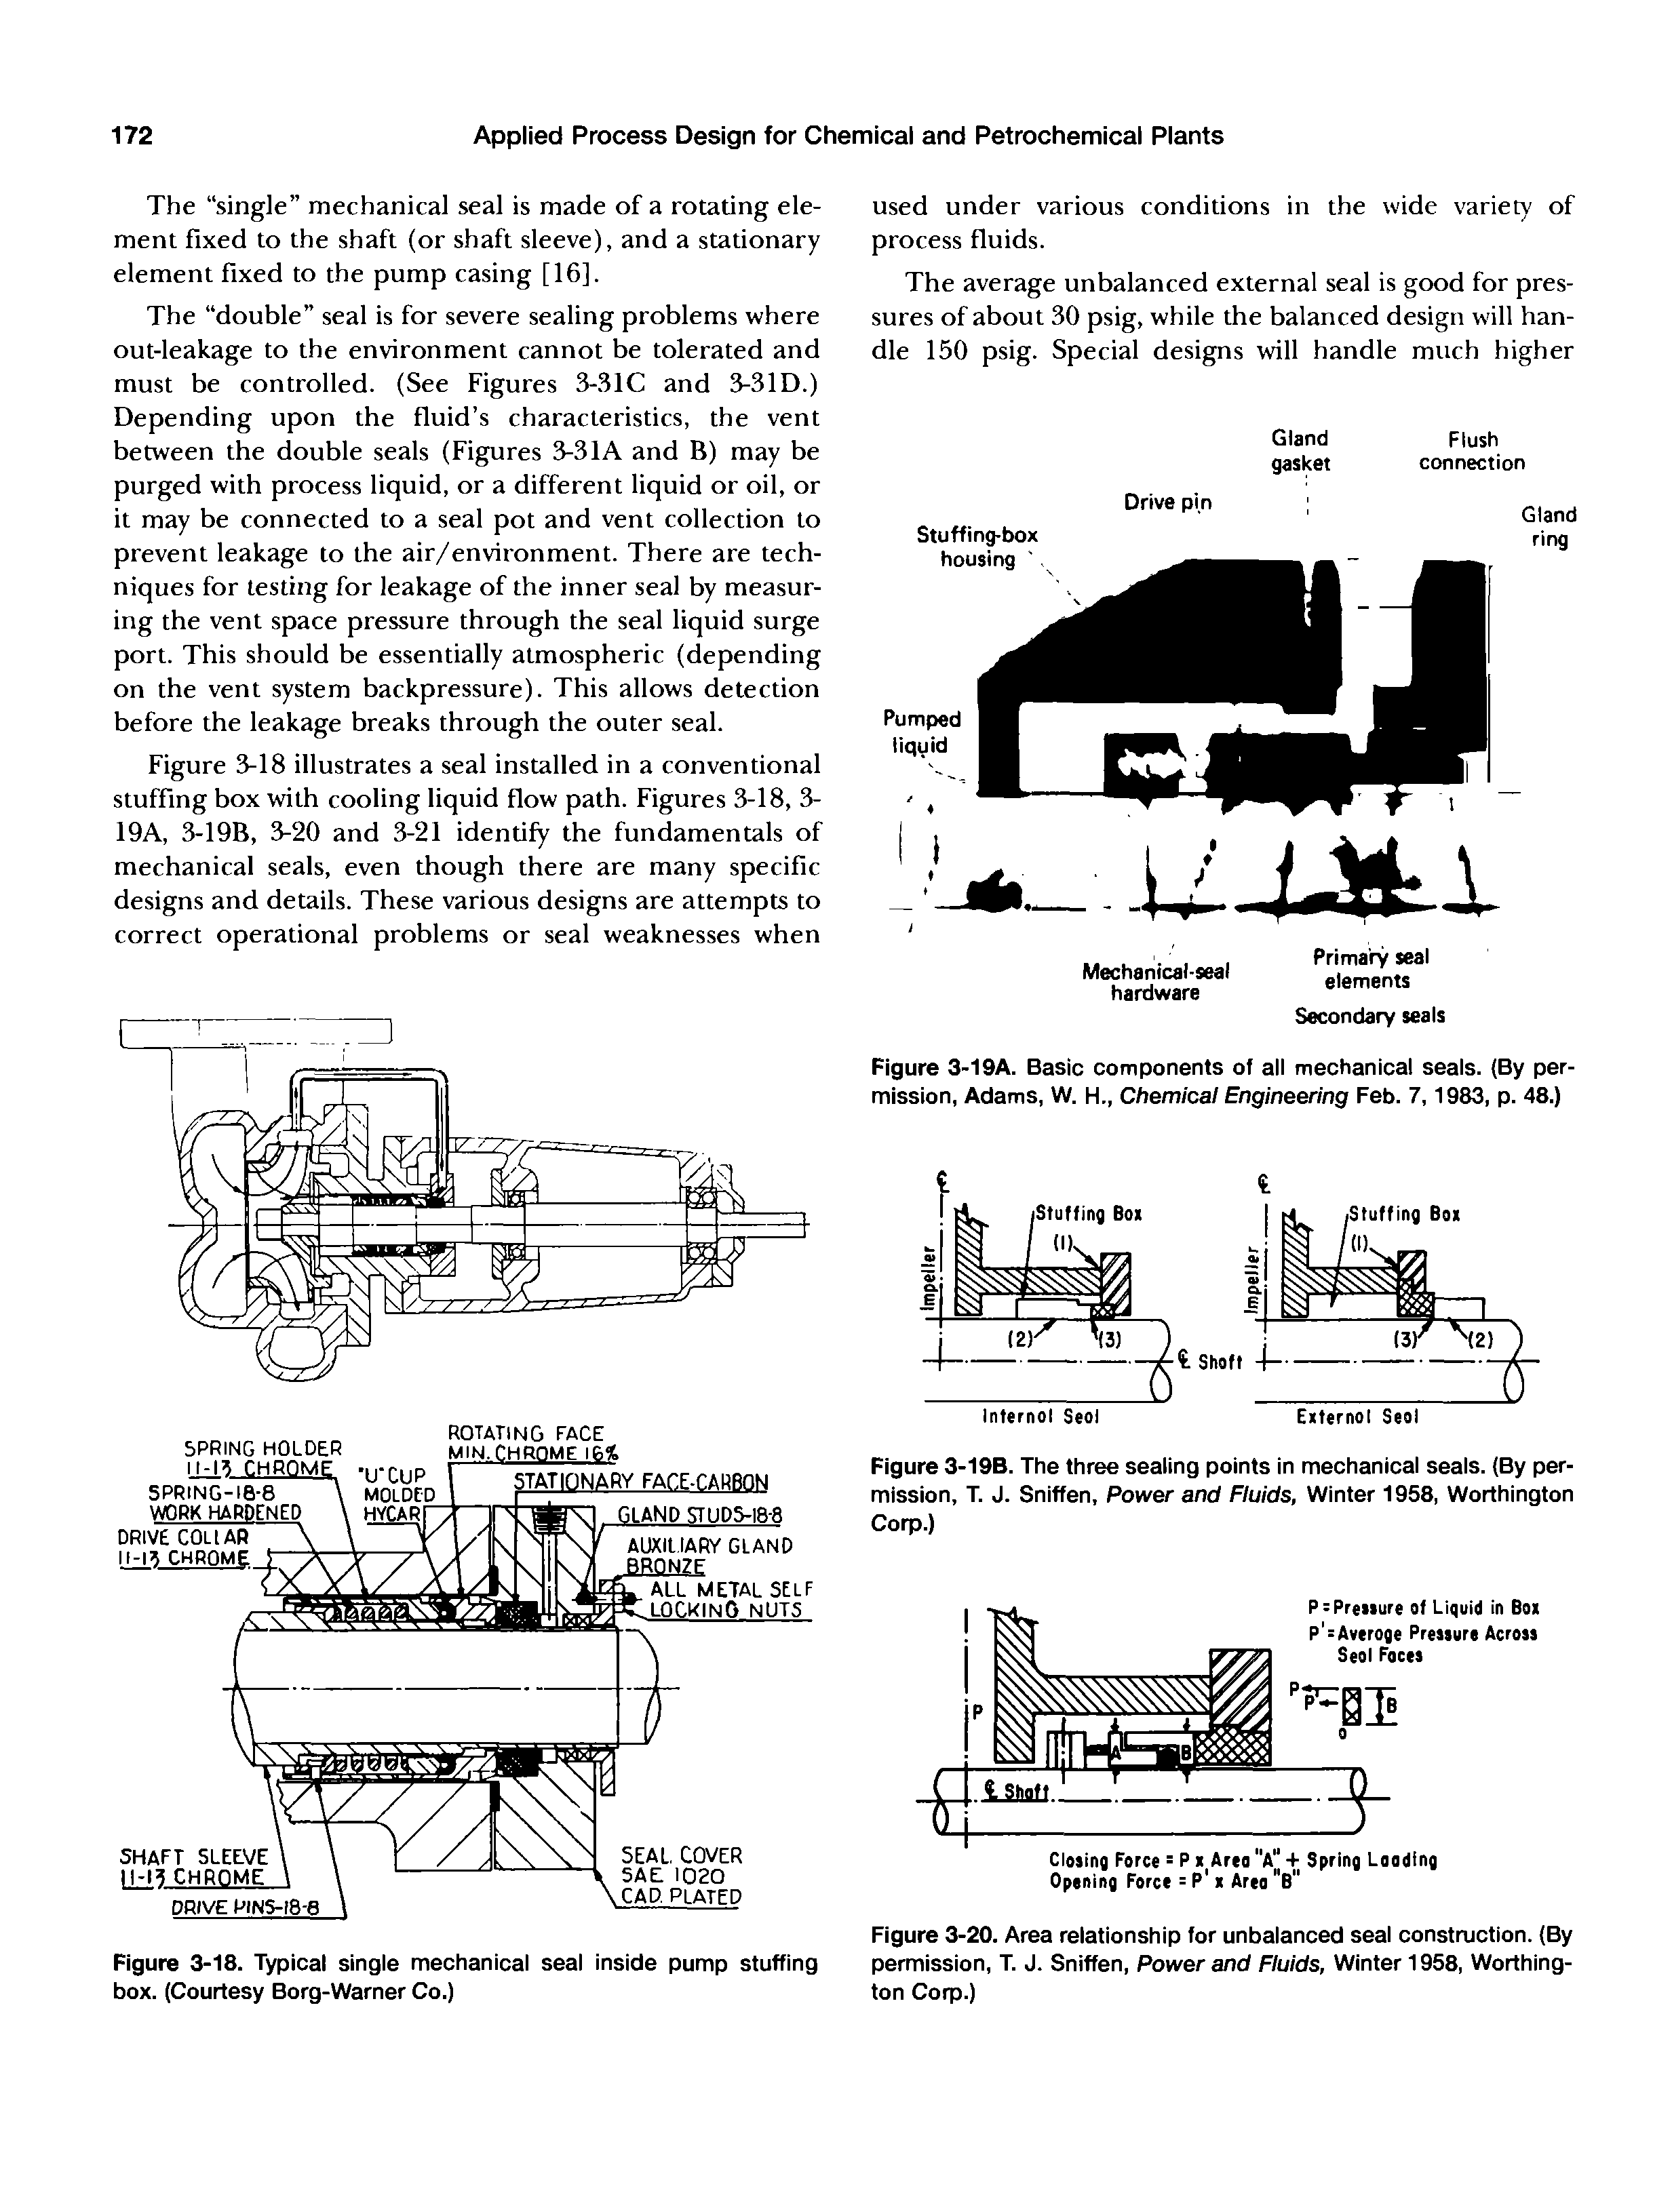 Figure 3-19B. The three sealing points in mechanical seals. (By permission, T. J. Sniffen, Power and Fluids, Winter 1958, Worthington Corp.)...